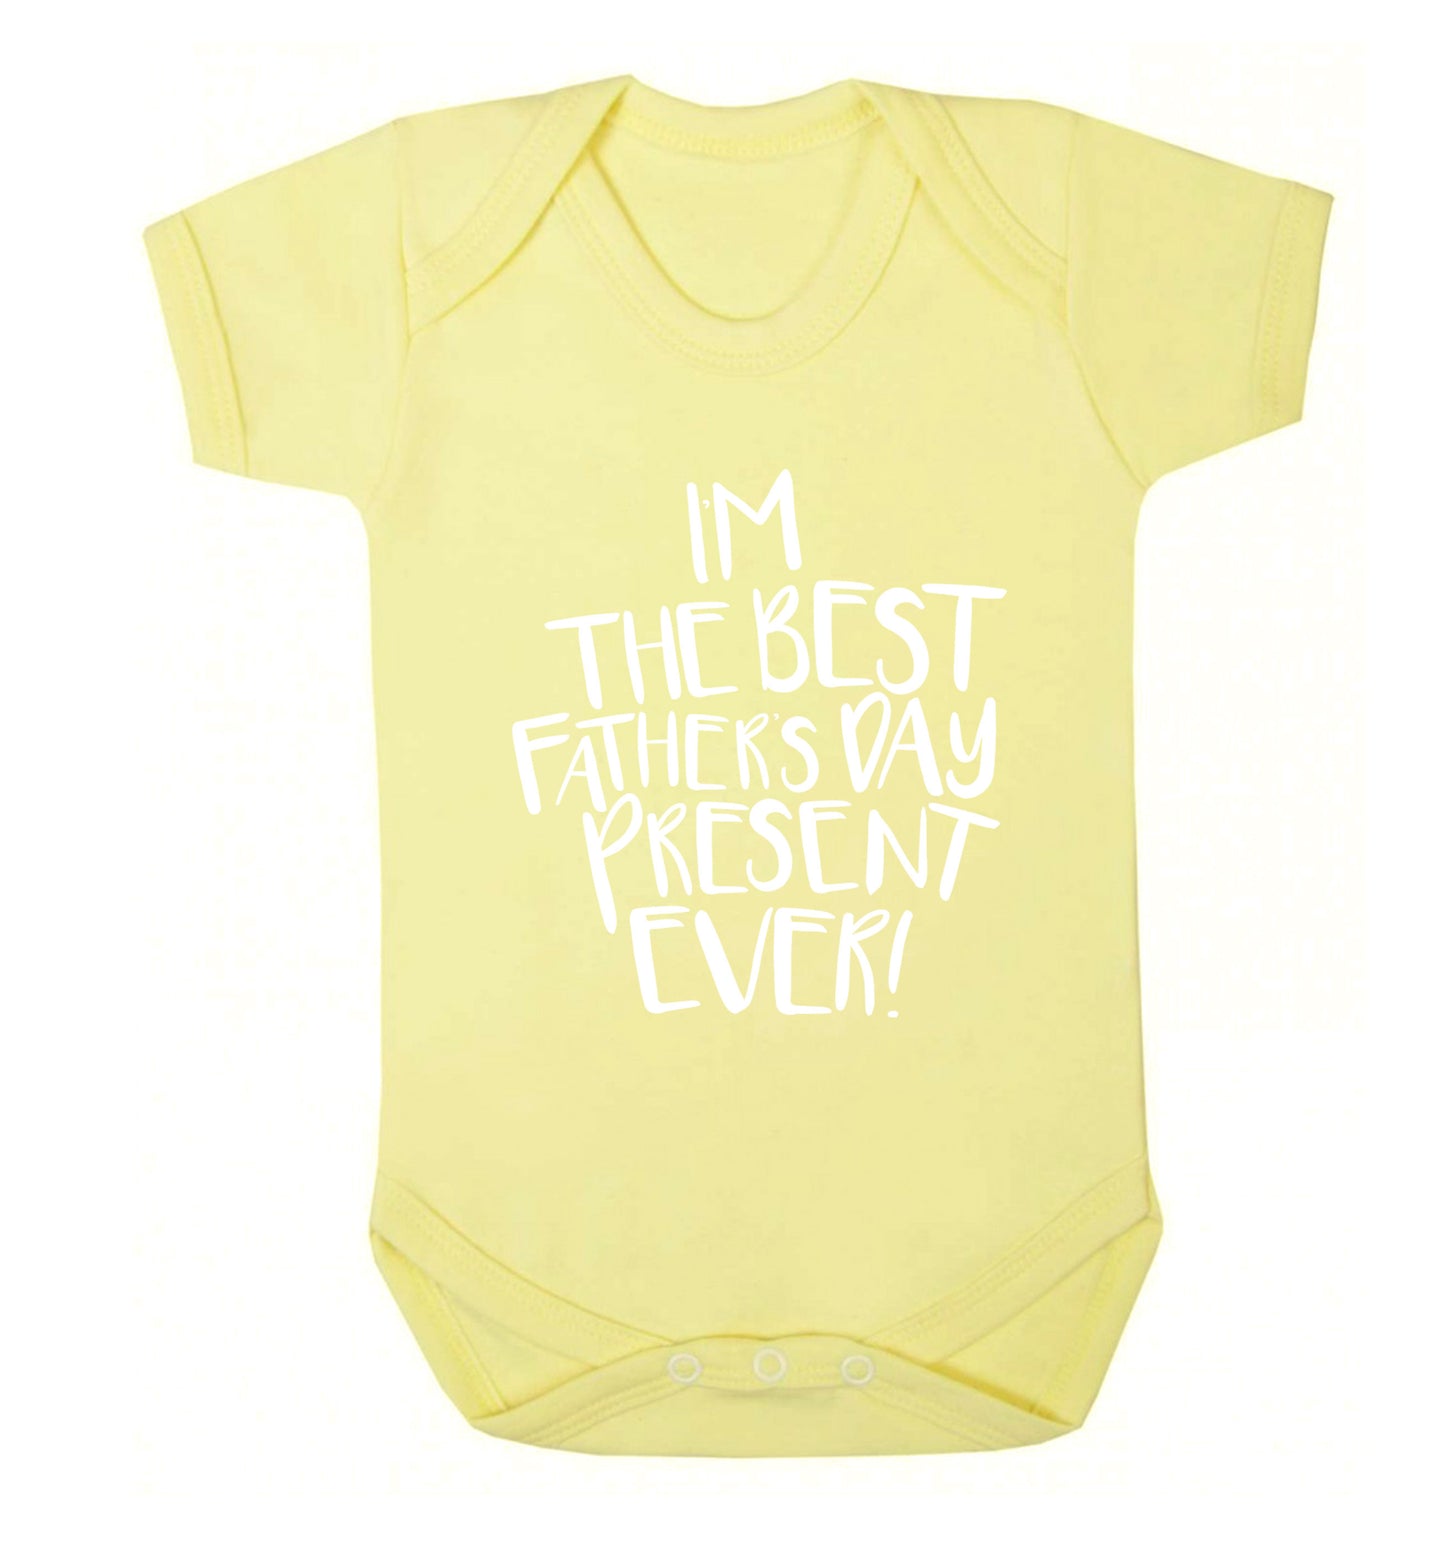 I'm the best father's day present ever! Baby Vest pale yellow 18-24 months